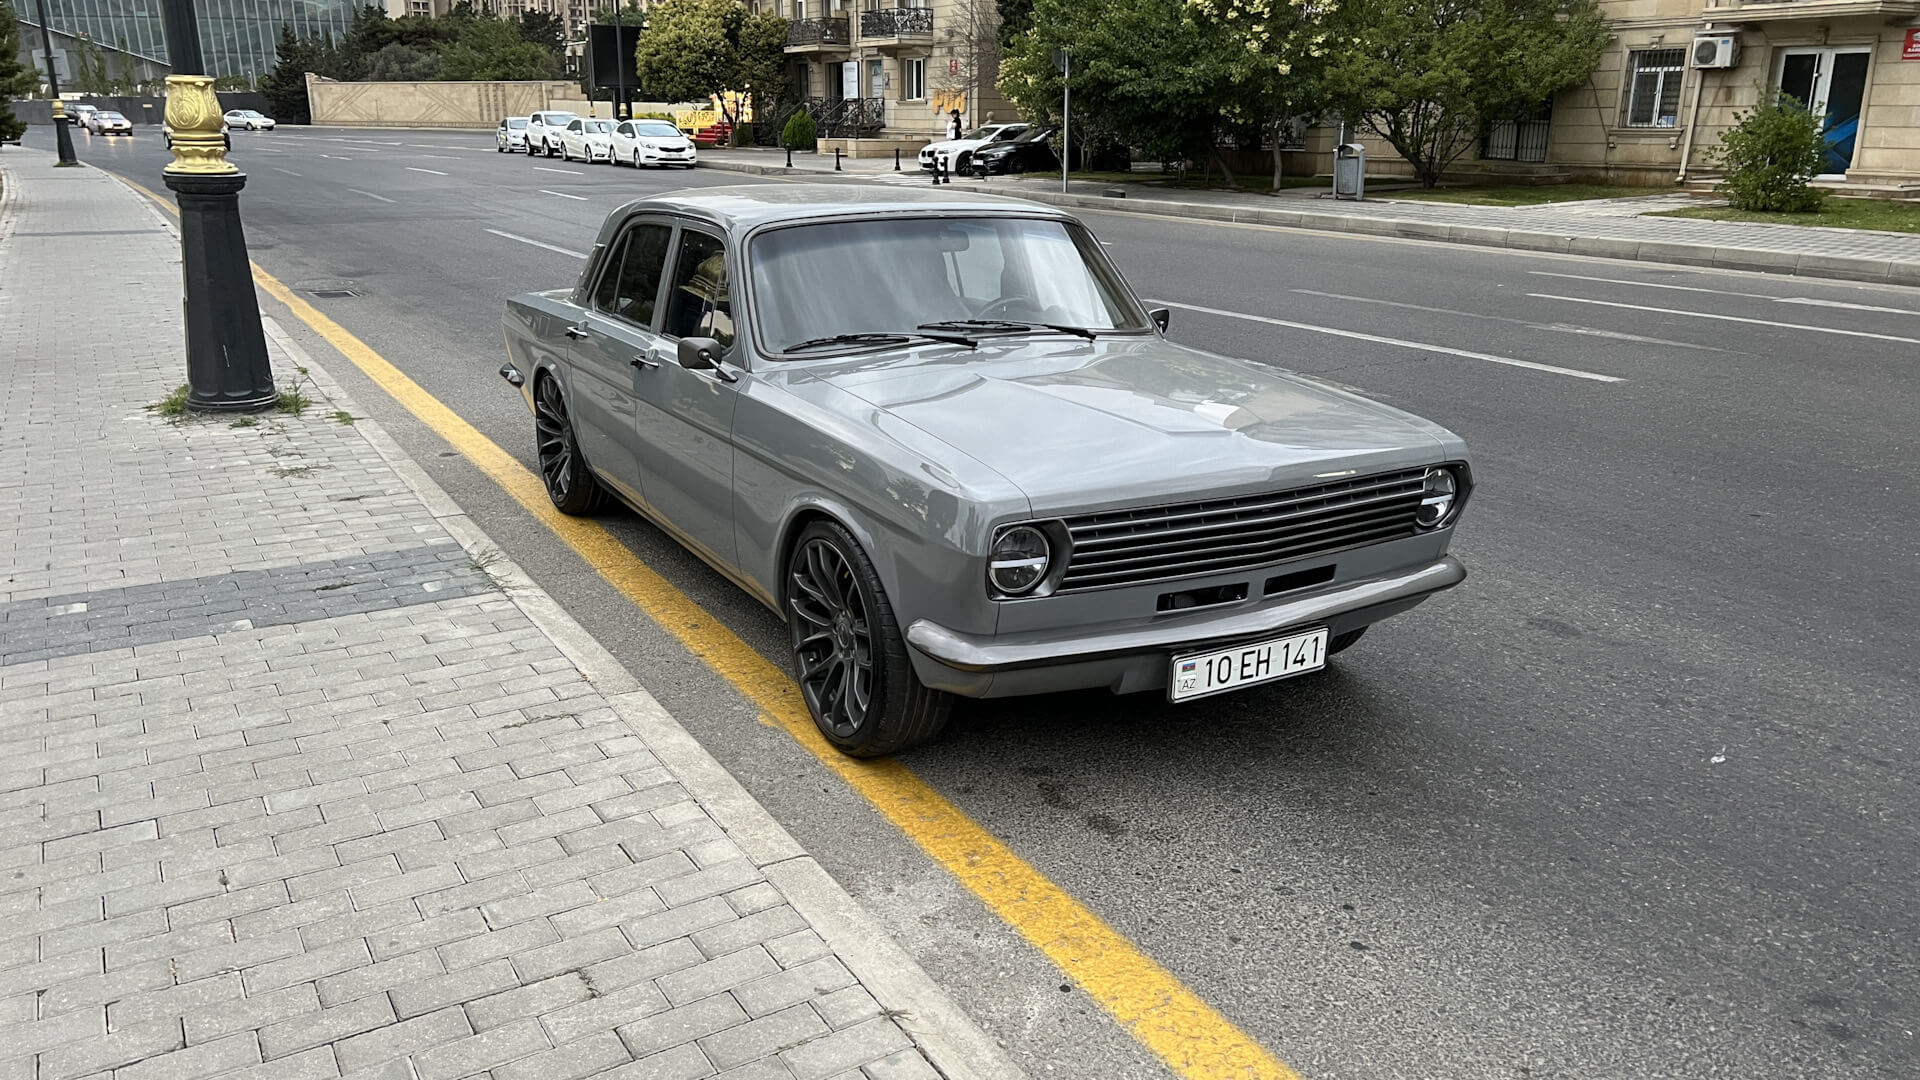 they took the GAZ-24 and turned it into a BMW with a 347-horsepower engine